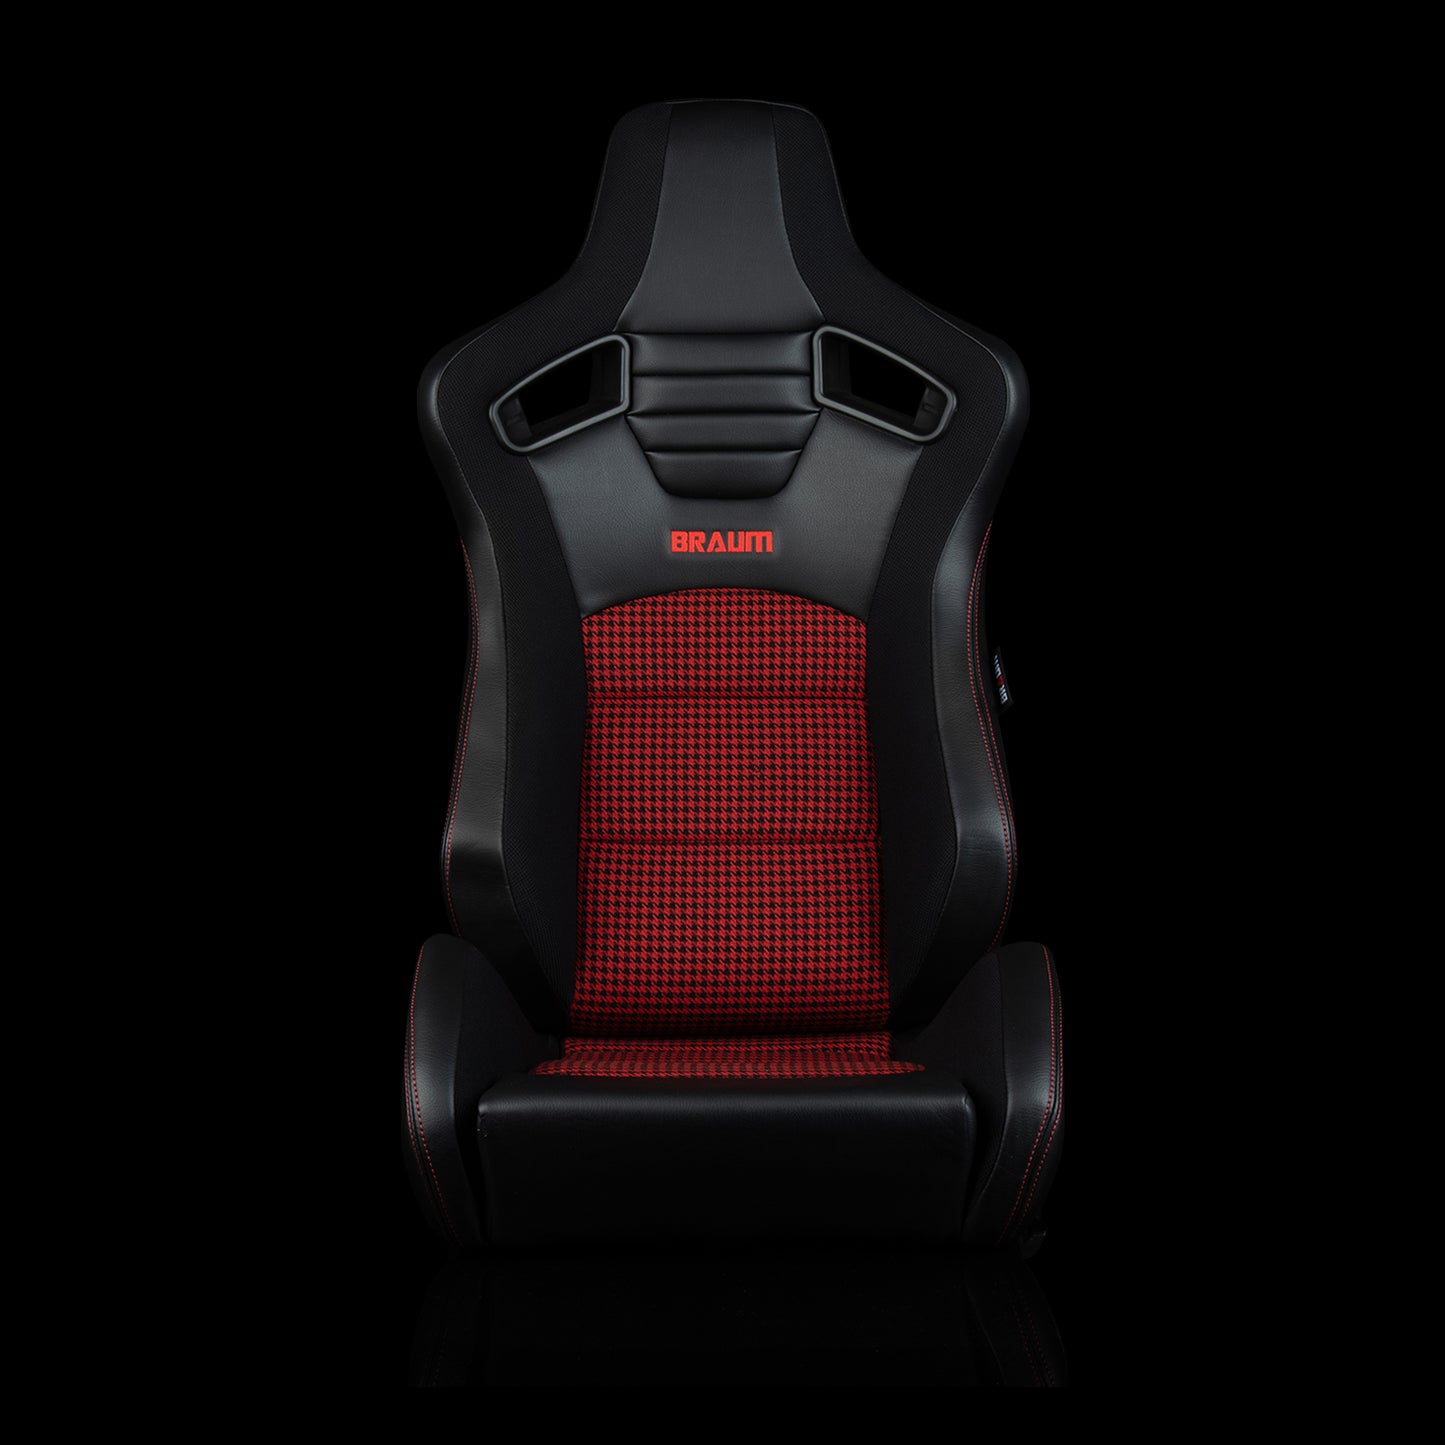 BRAUM ELITE-S Series Sport Reclinable Seats (Black Leatherette | Red Houndstooth) - Priced Per Pair